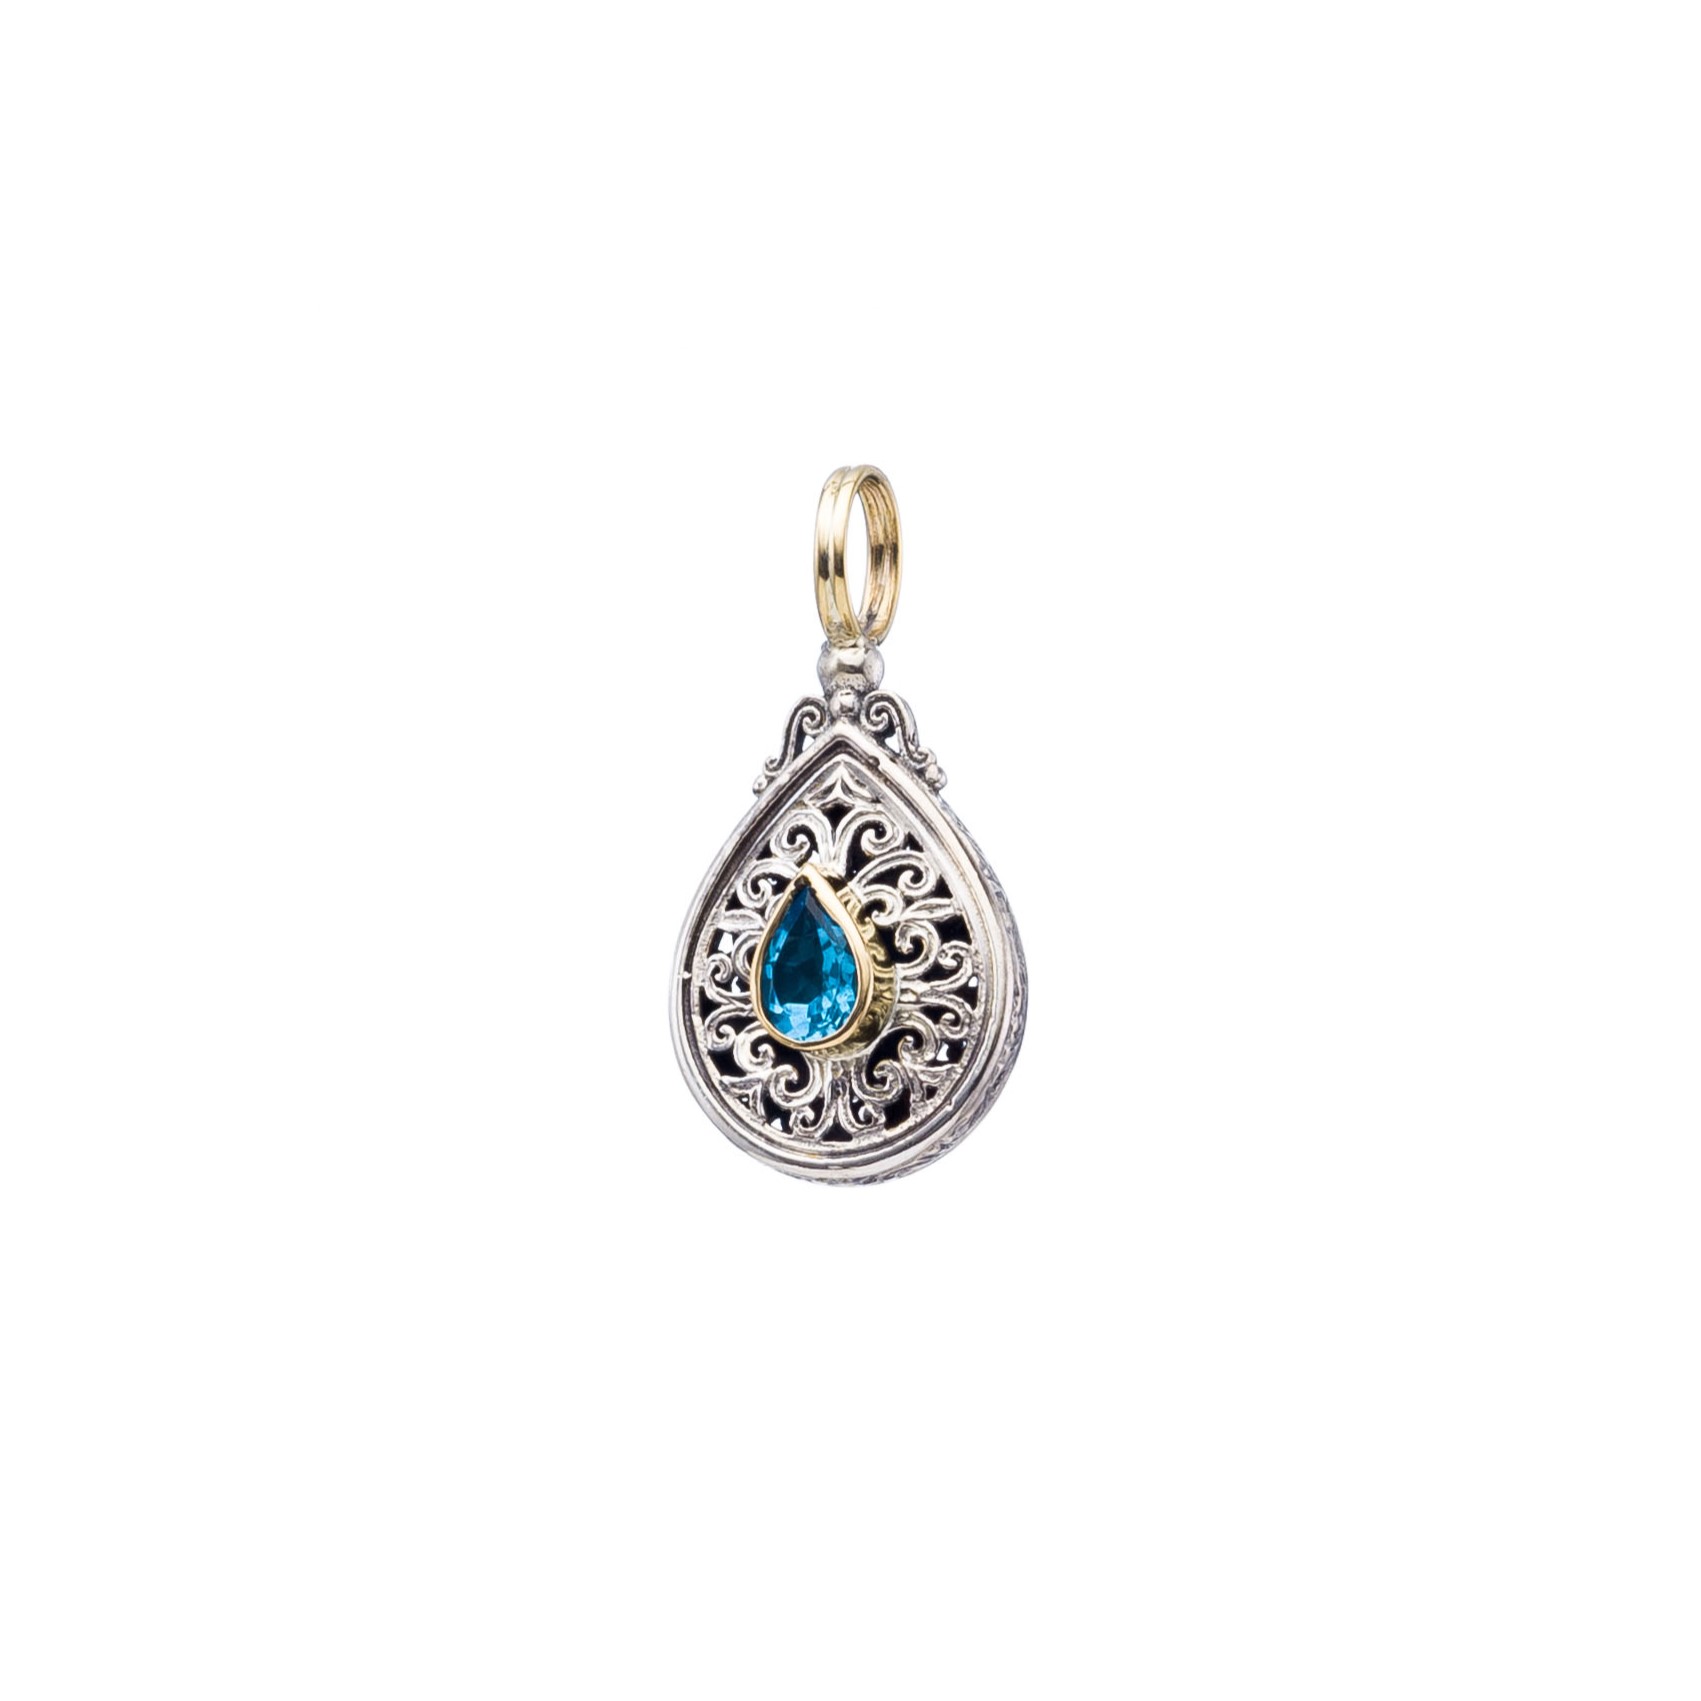 Mediterranean drop pendant in 18K Gold and Sterling silver with blue topaz